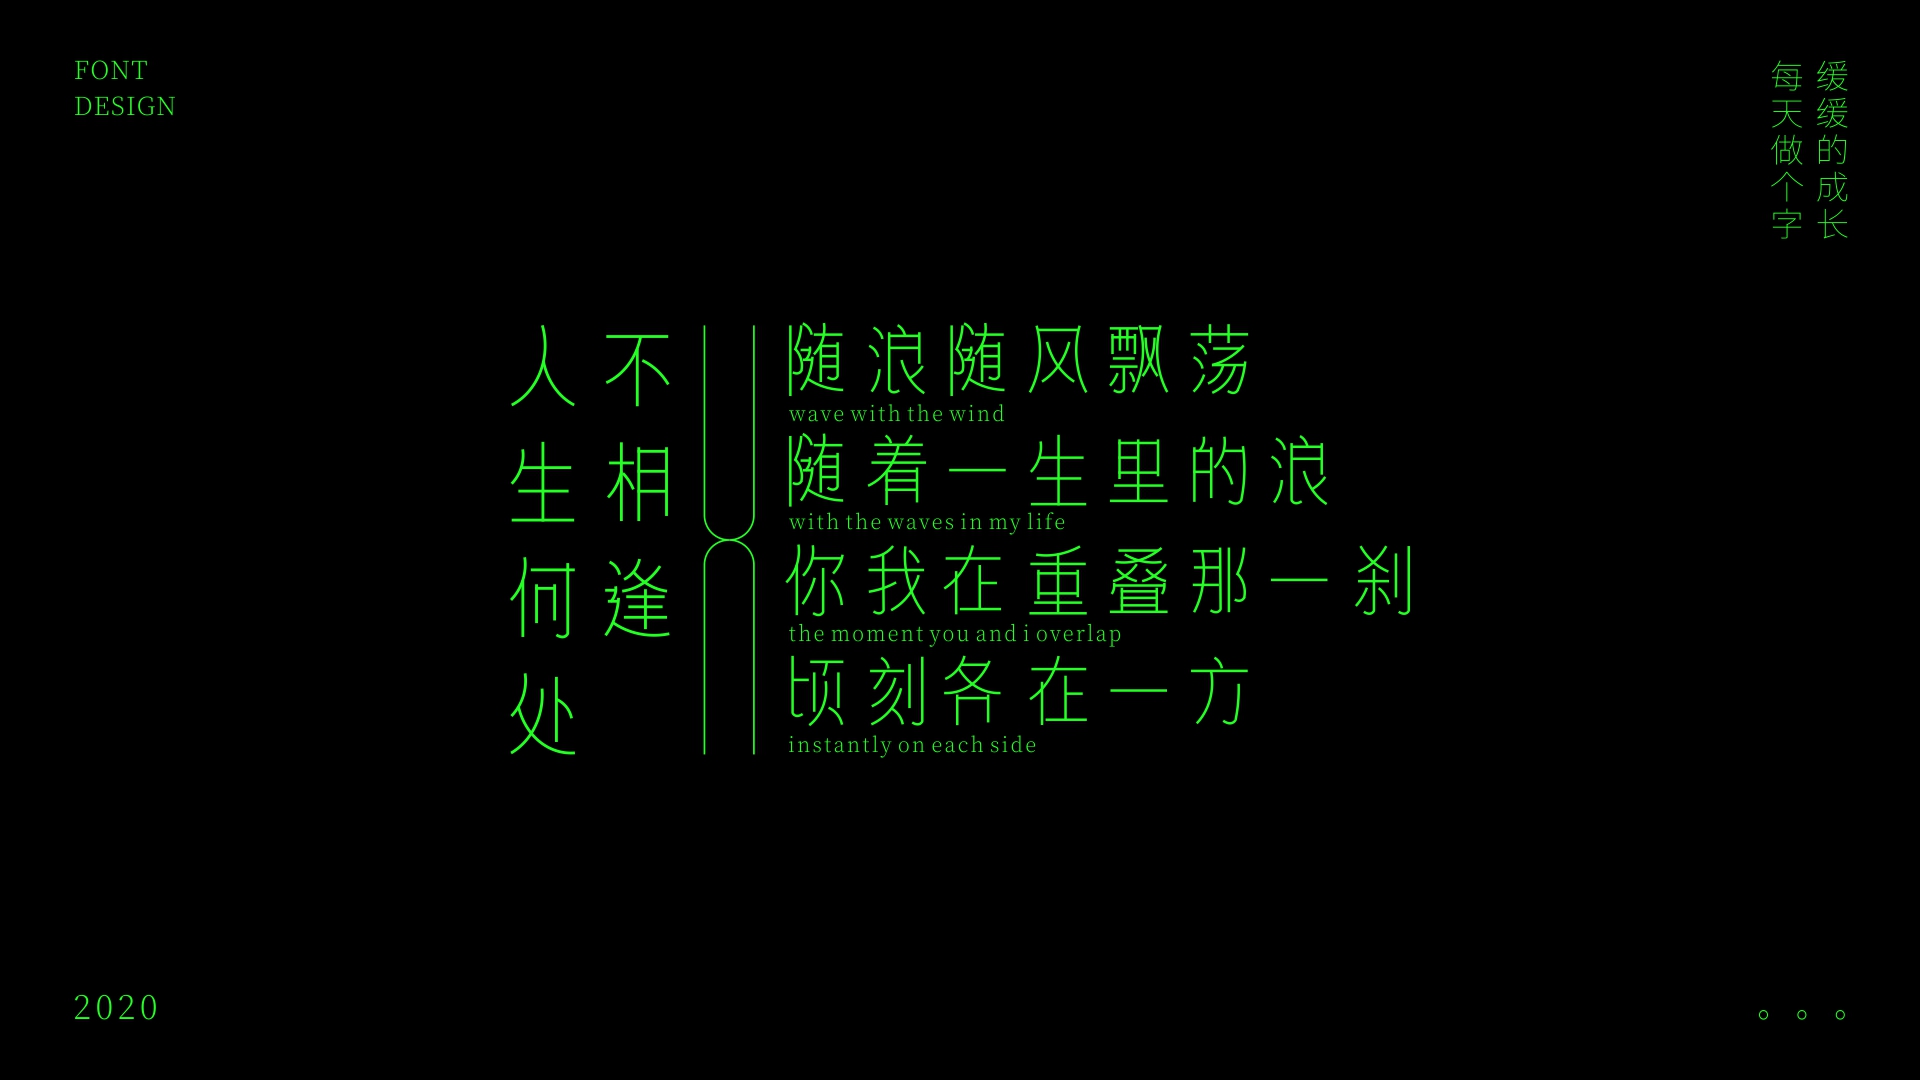 Font design of healing system based on green style